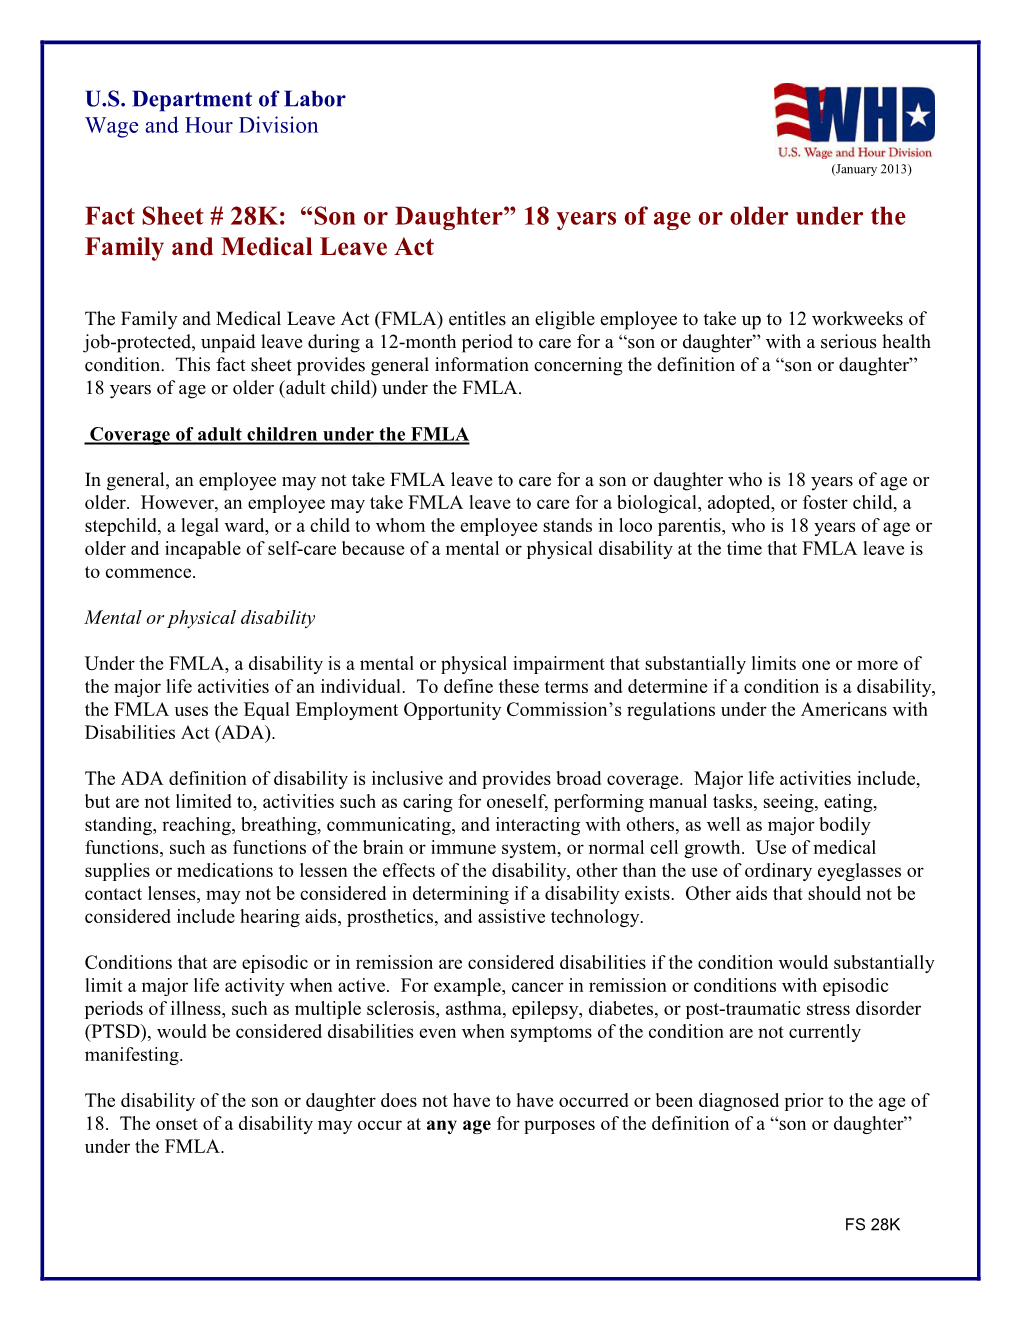 Fact Sheet # 28K: “Son Or Daughter” 18 Years of Age Or Older Under the Family and Medical Leave Act